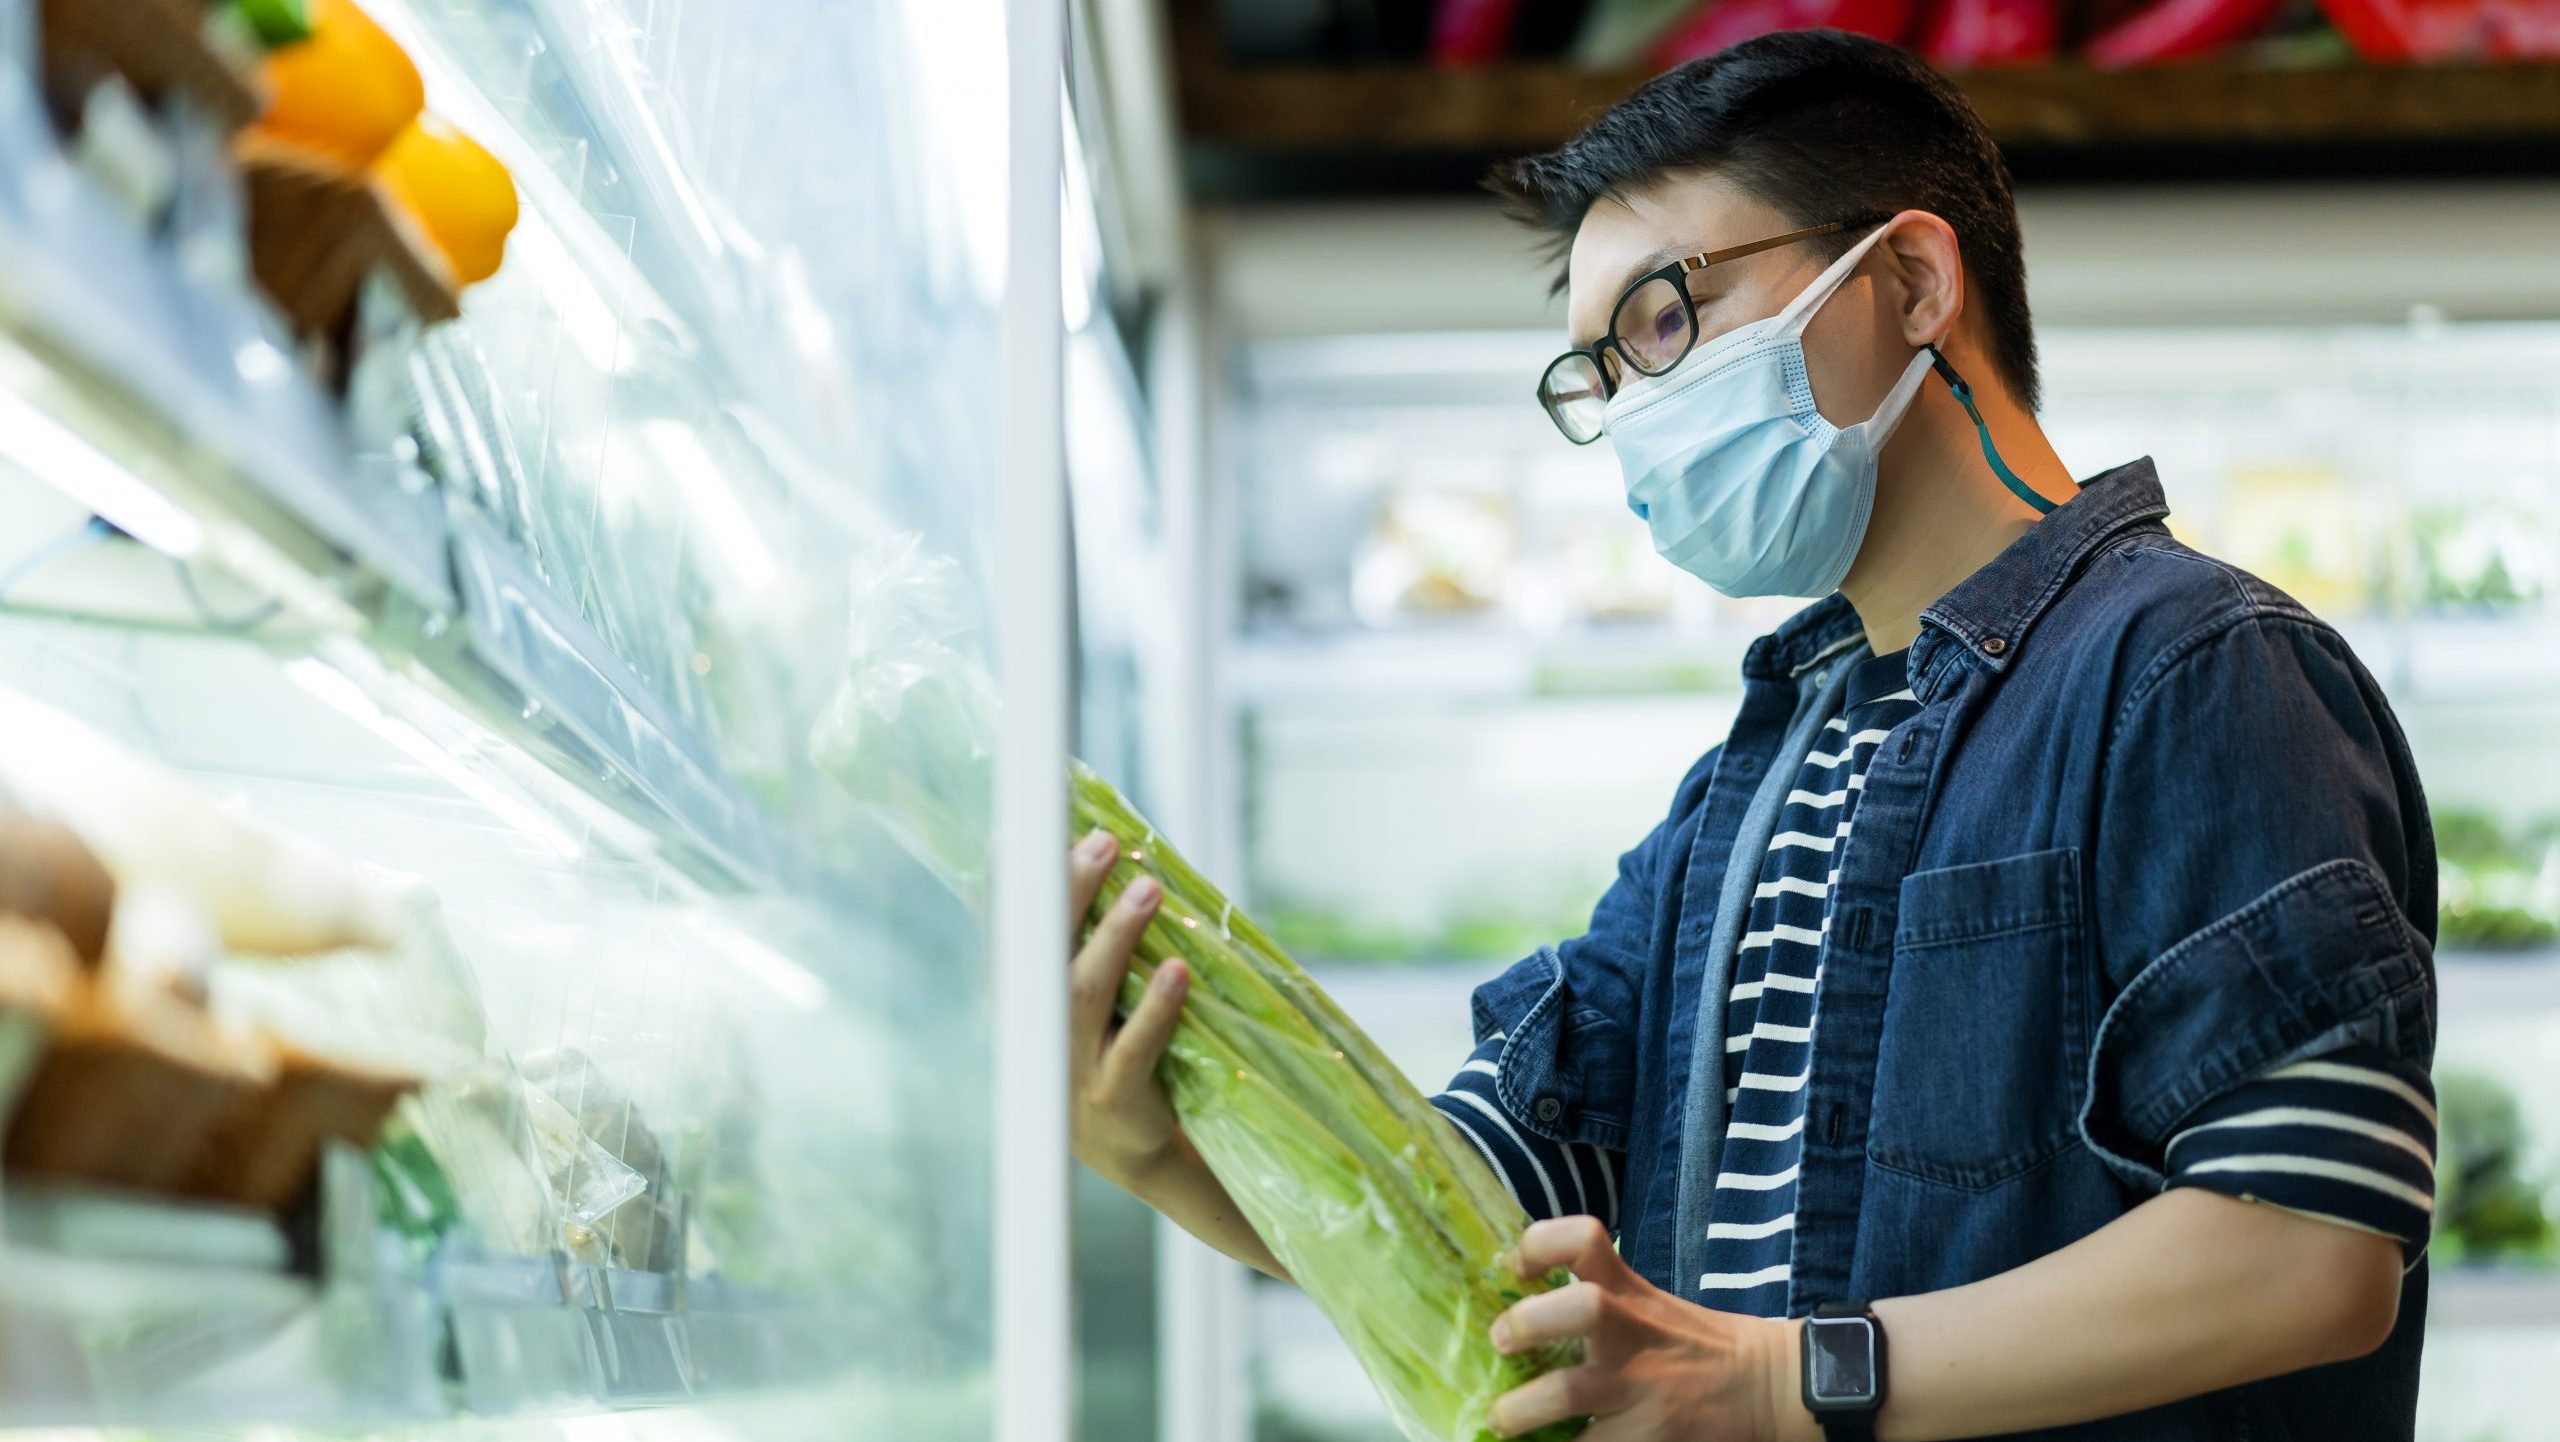 Asian man looking at a vegetable's price in a supermarket.